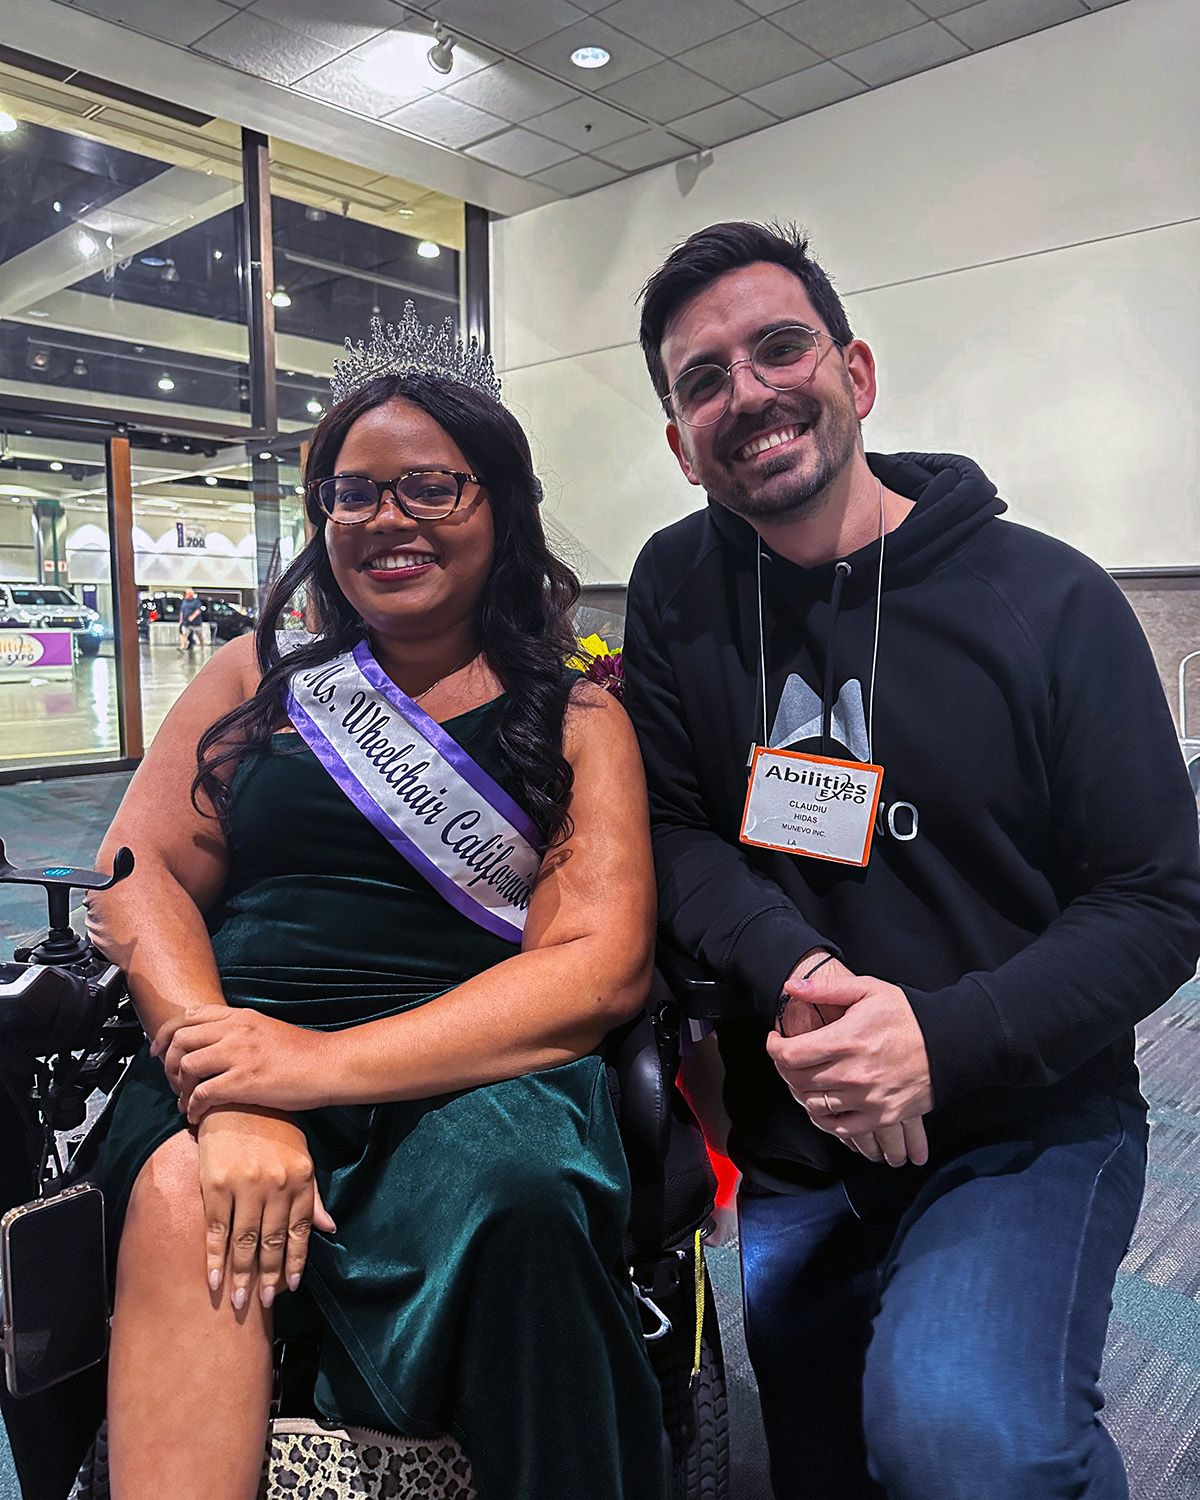 Munevo CEO and Ms Wheelchair California at Abilities Expo event